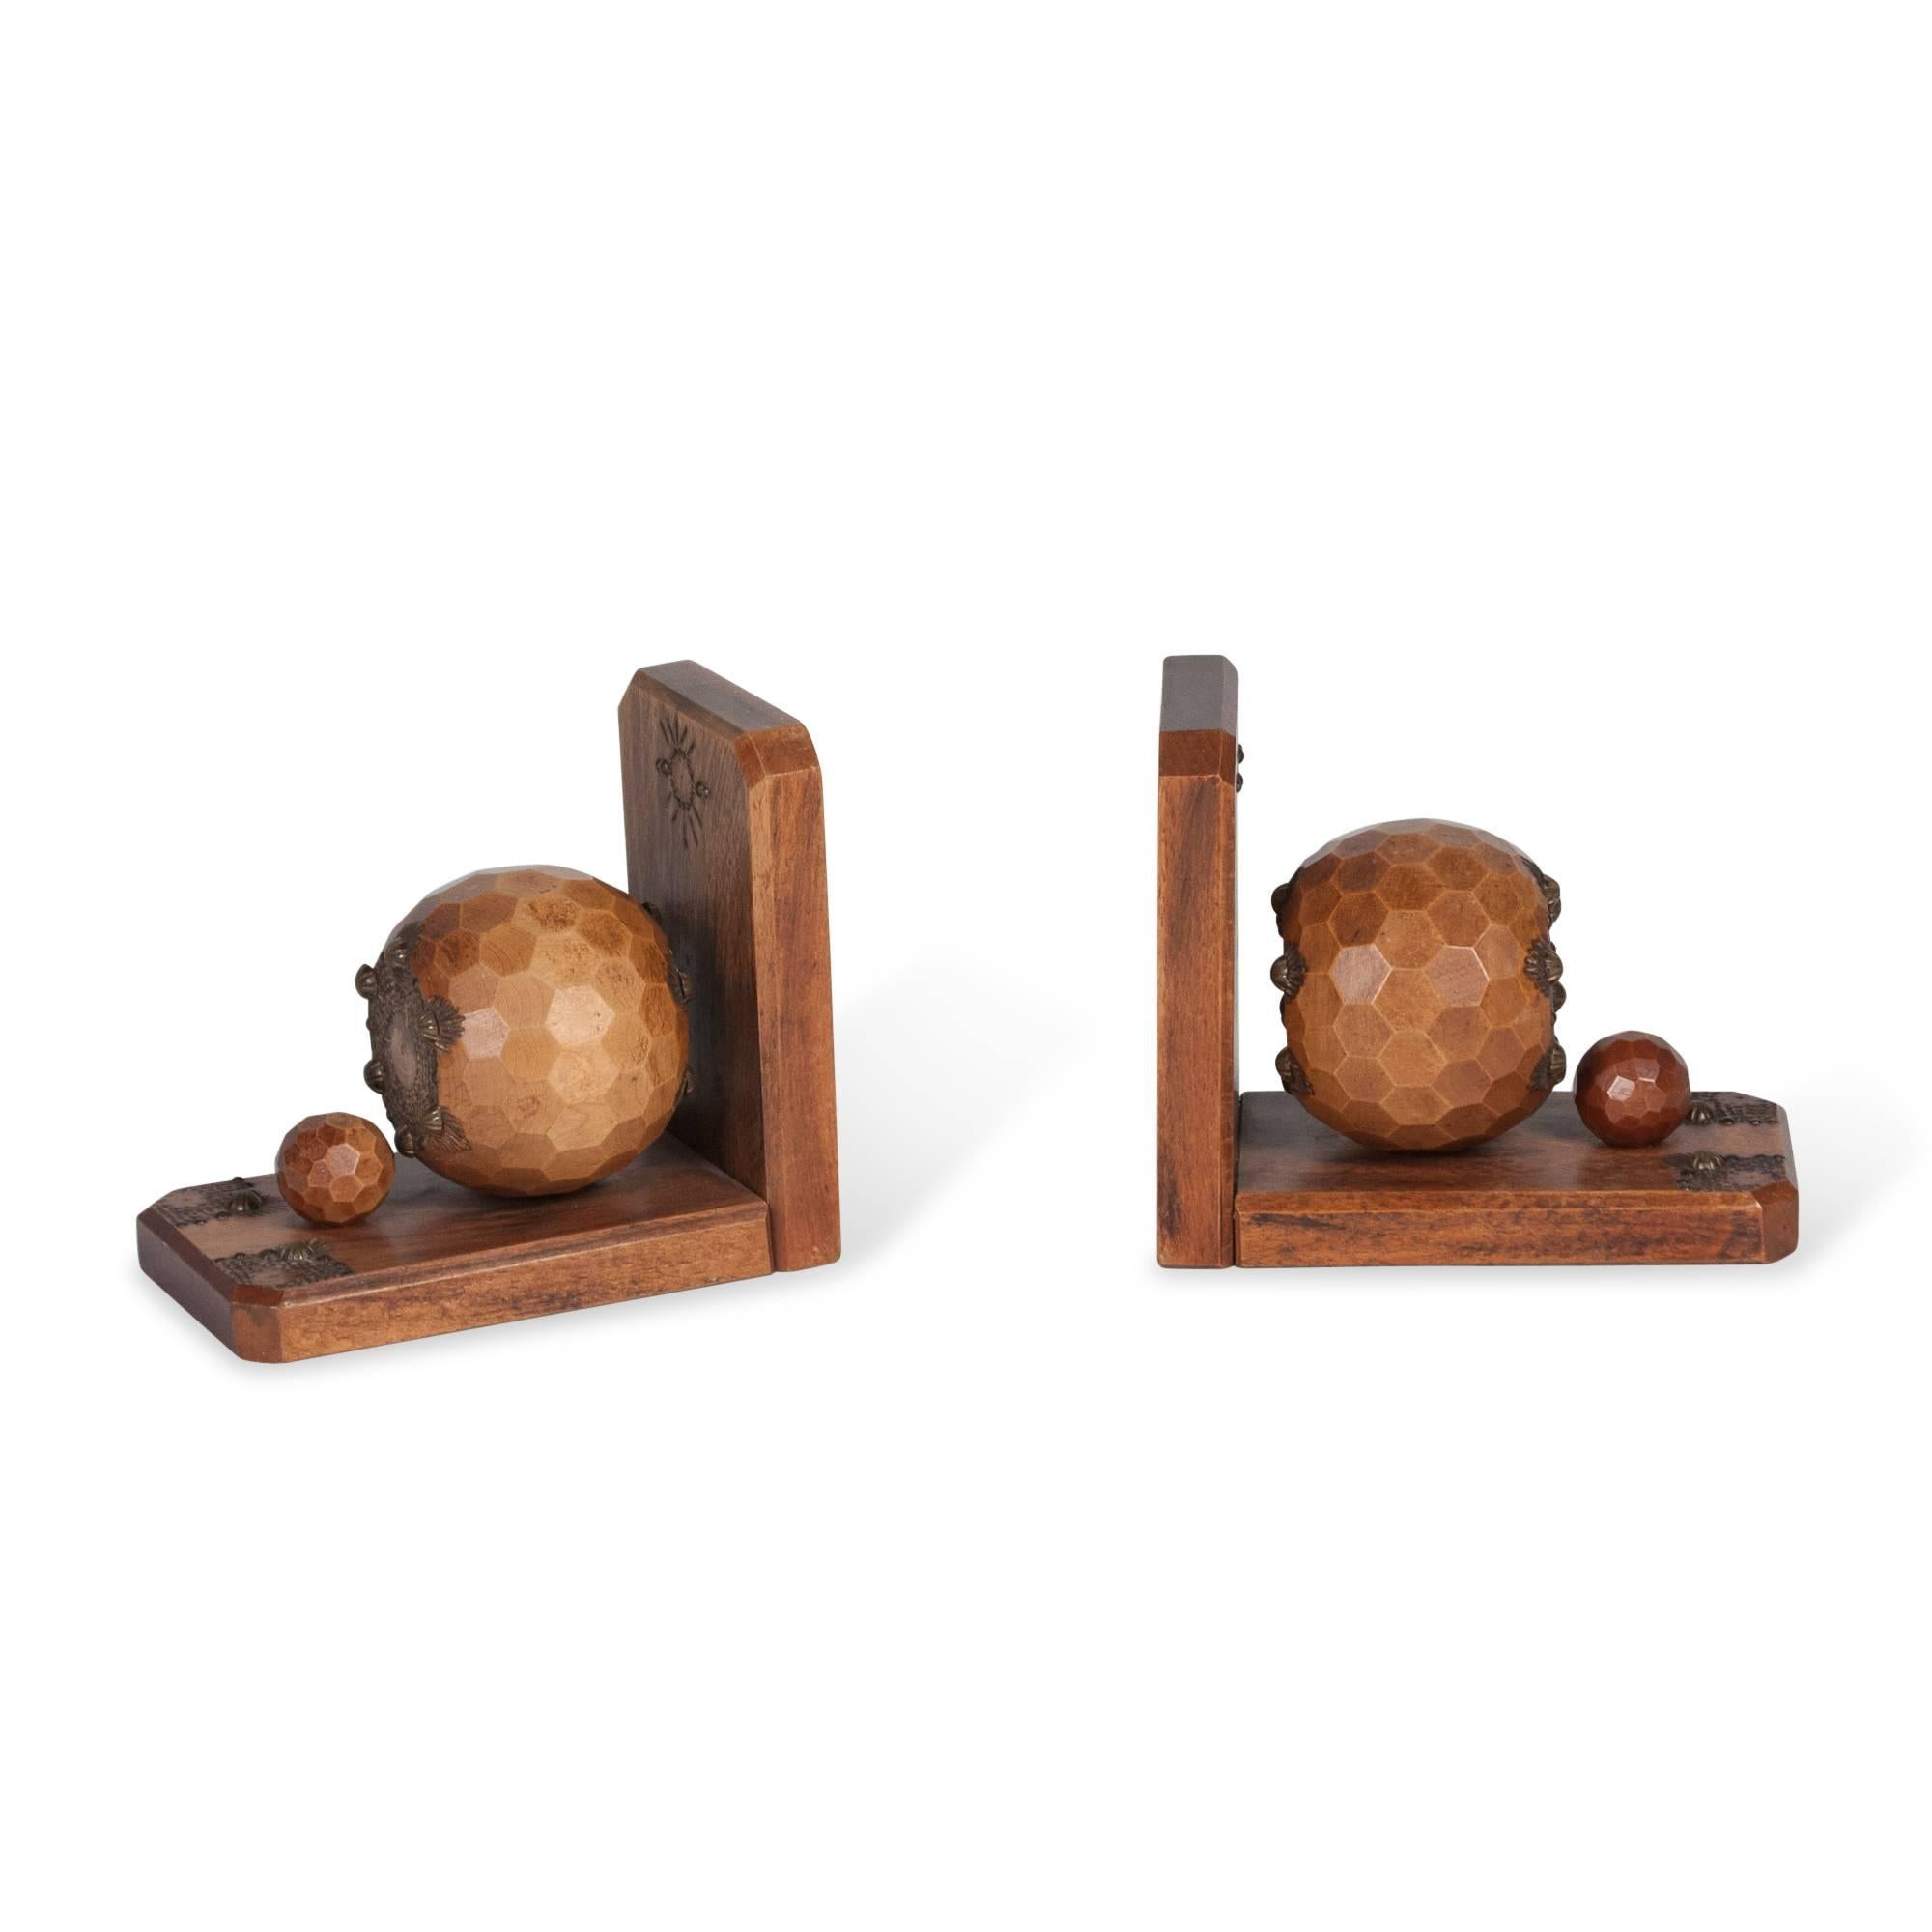 Pair of oak bookends, the faceted sphere mounted on an L-shaped base with brass decoration, French, circa 1930. Measures: 3.25 in. W, 6.5 in. D, 5.5 in. H.